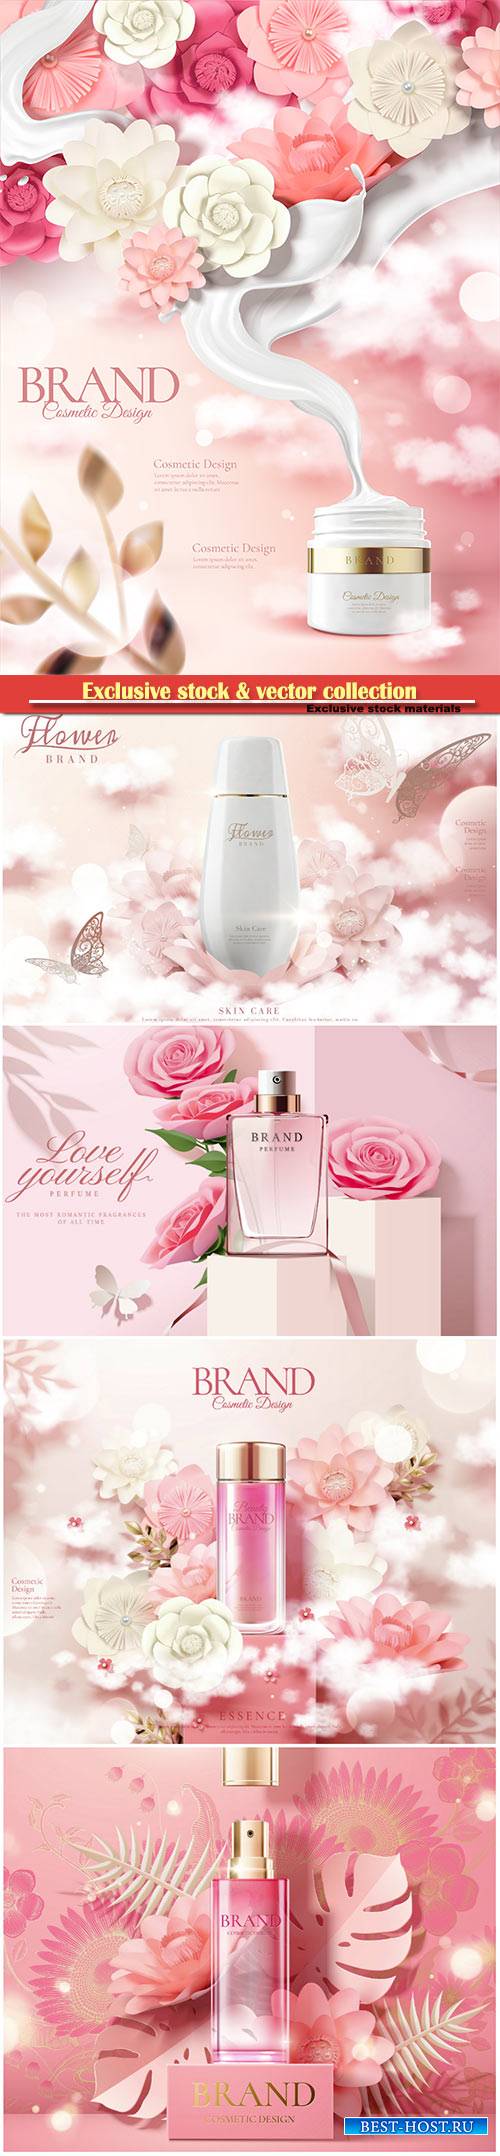 Skincare bottle ads with white and pink paper flowers in 3d illustration